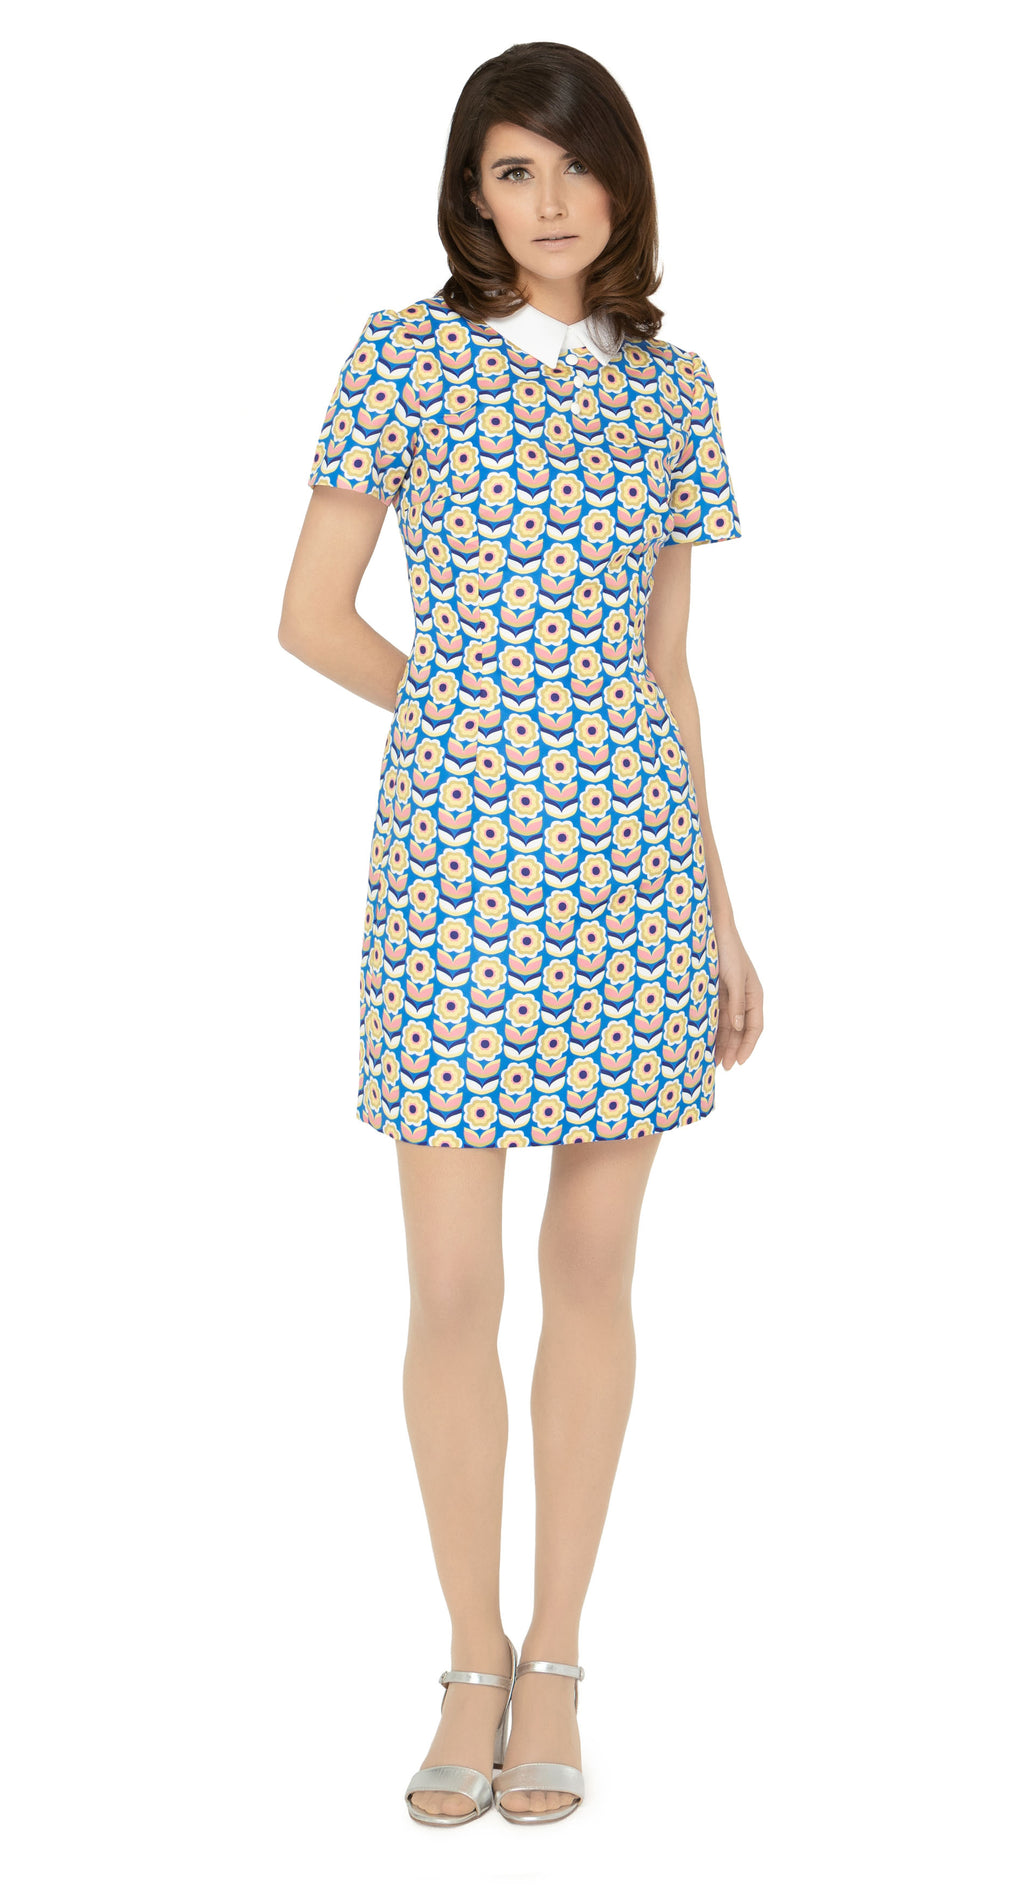 This classic, fitted sixties style spring floral dress produced in a luxury French mill weave in royal blue, pink, white, mustard yellow and navy-blue tones, with a classic stand up collar and short slightly puffed sleeves. It is designed with a zippered back closure for easy wear. The intricate detailing and exquisite craftsmanship make it a stunning piece. Perfect for a warm spring day, this dress is both stylish and comfortable.